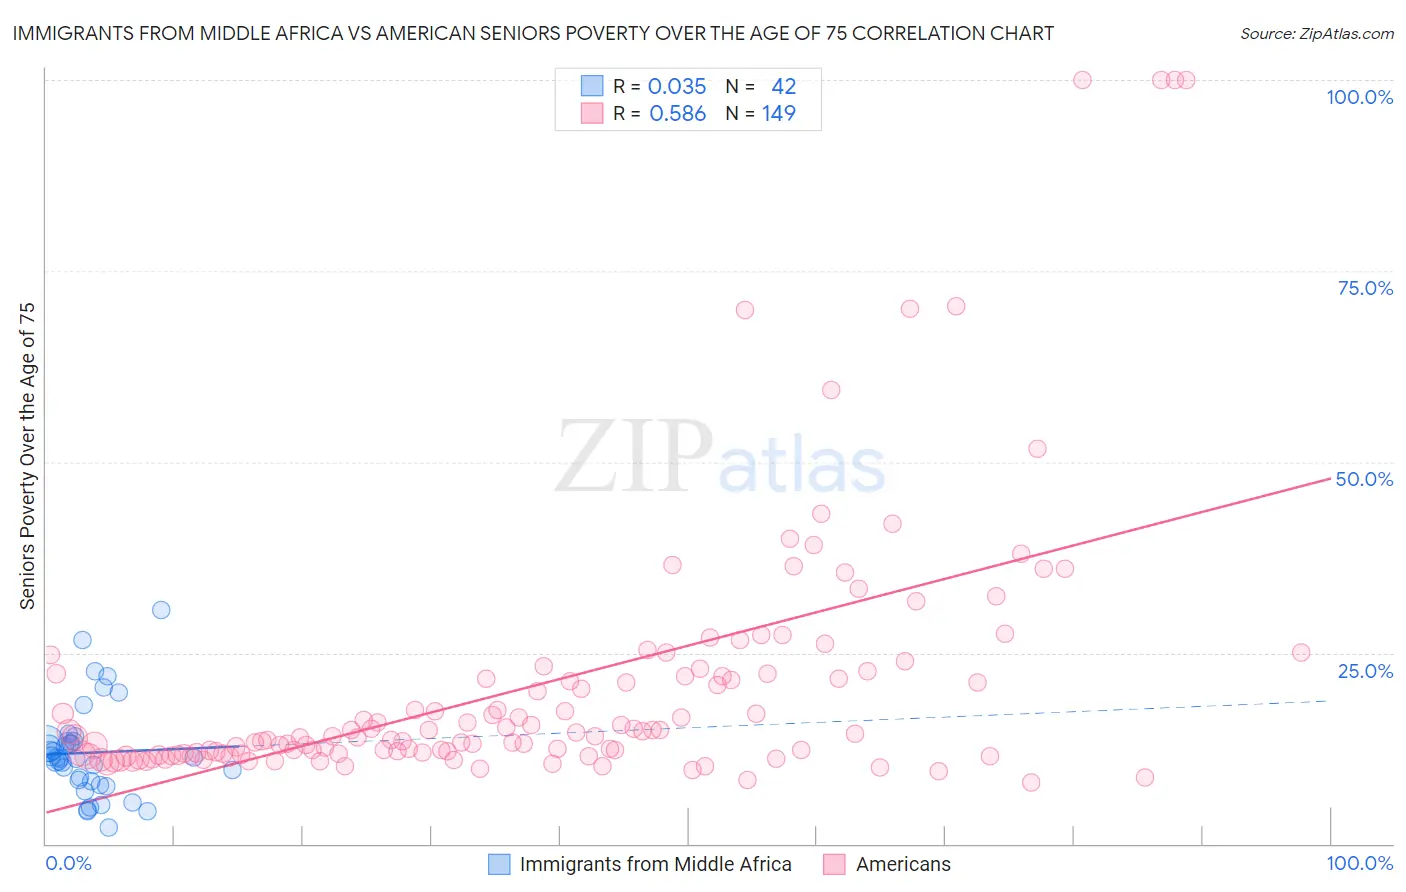 Immigrants from Middle Africa vs American Seniors Poverty Over the Age of 75